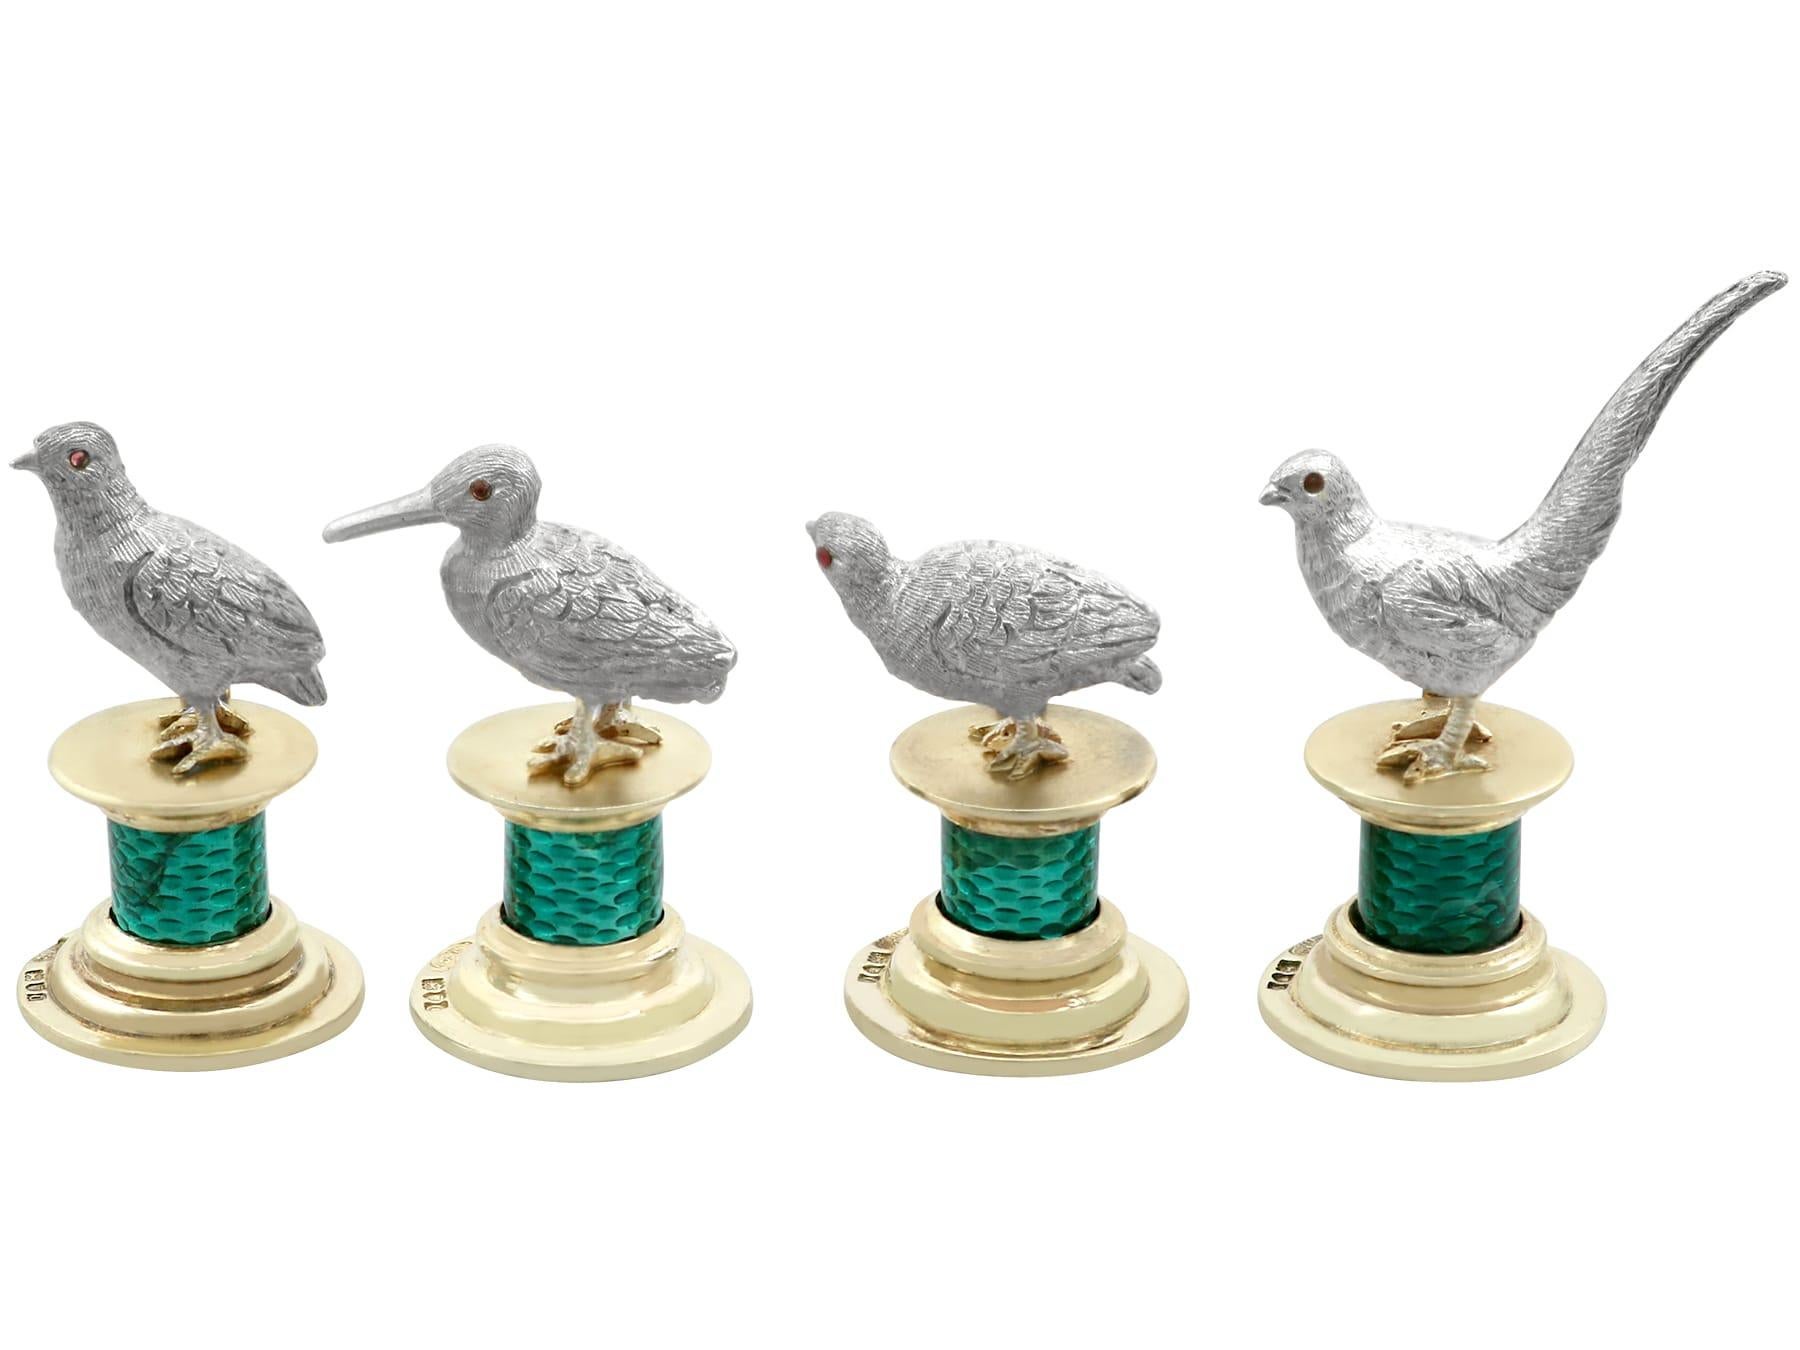 Antique Edwardian Enamel and Sterling Silver Bird Menu / Card Holders (1909) In Excellent Condition For Sale In Jesmond, Newcastle Upon Tyne